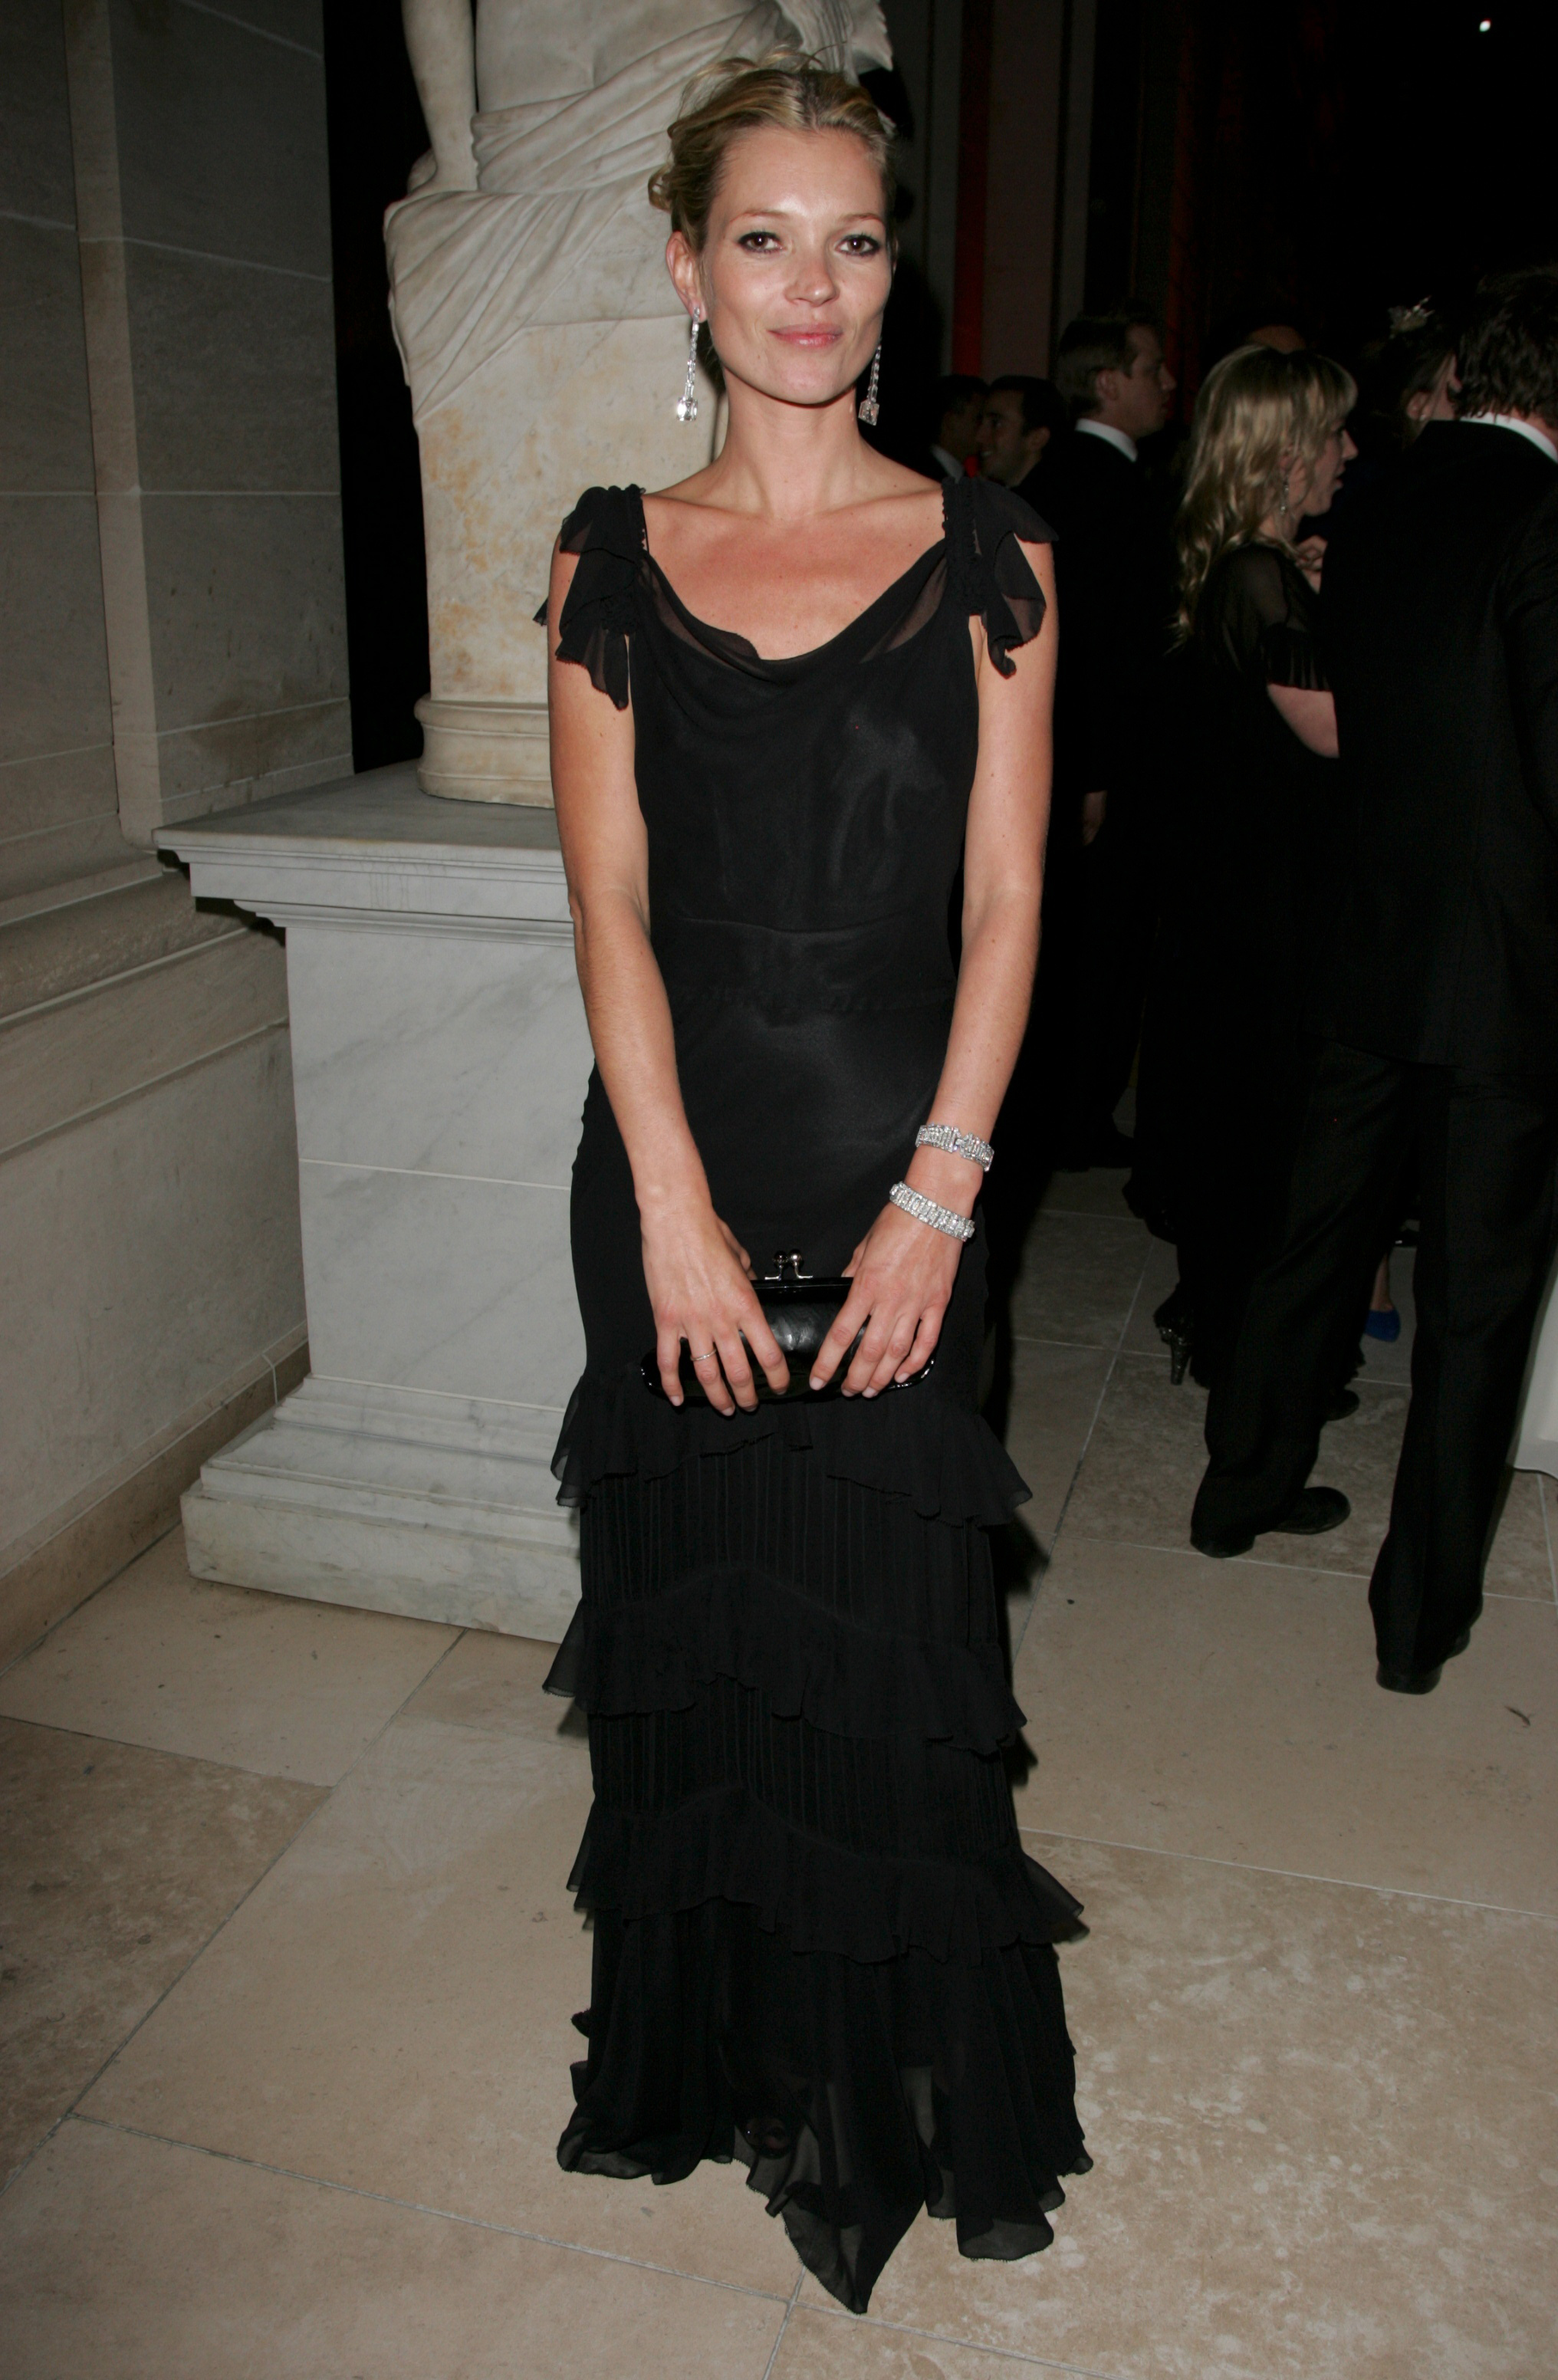 'Poiret: King of Fashion' Costume Institute Gala at The Metropolitan Museum of Art, New York, America - 07 May 2007